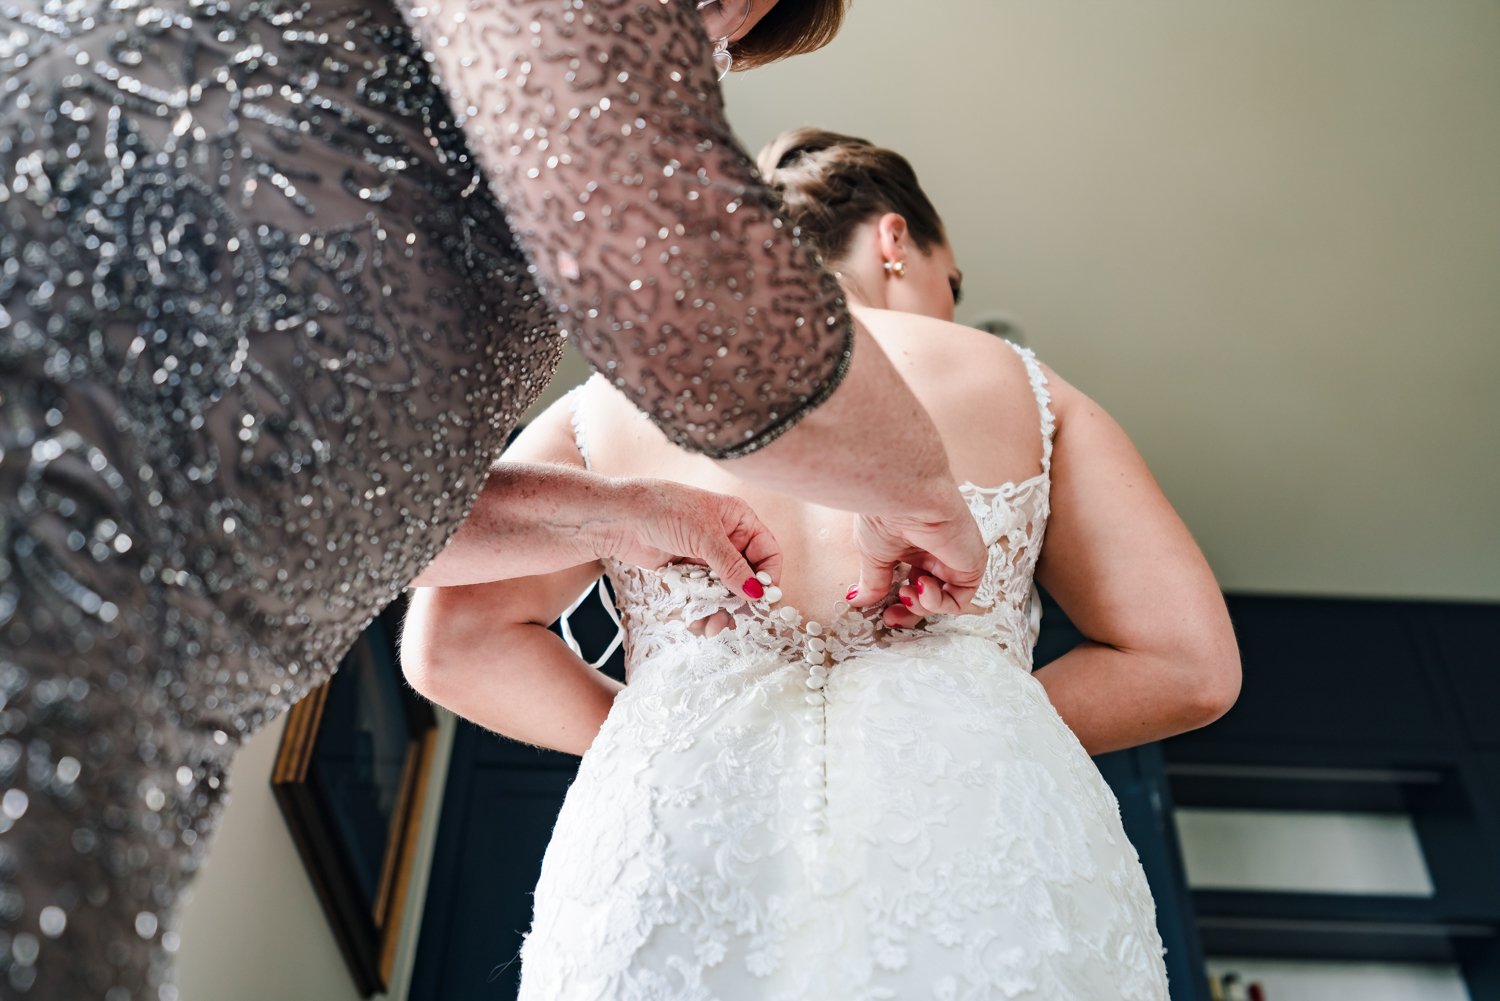  The Ramble Hotel wedding by Denver photographer, JMGant Photography featuring Ahsley and Jeremy 